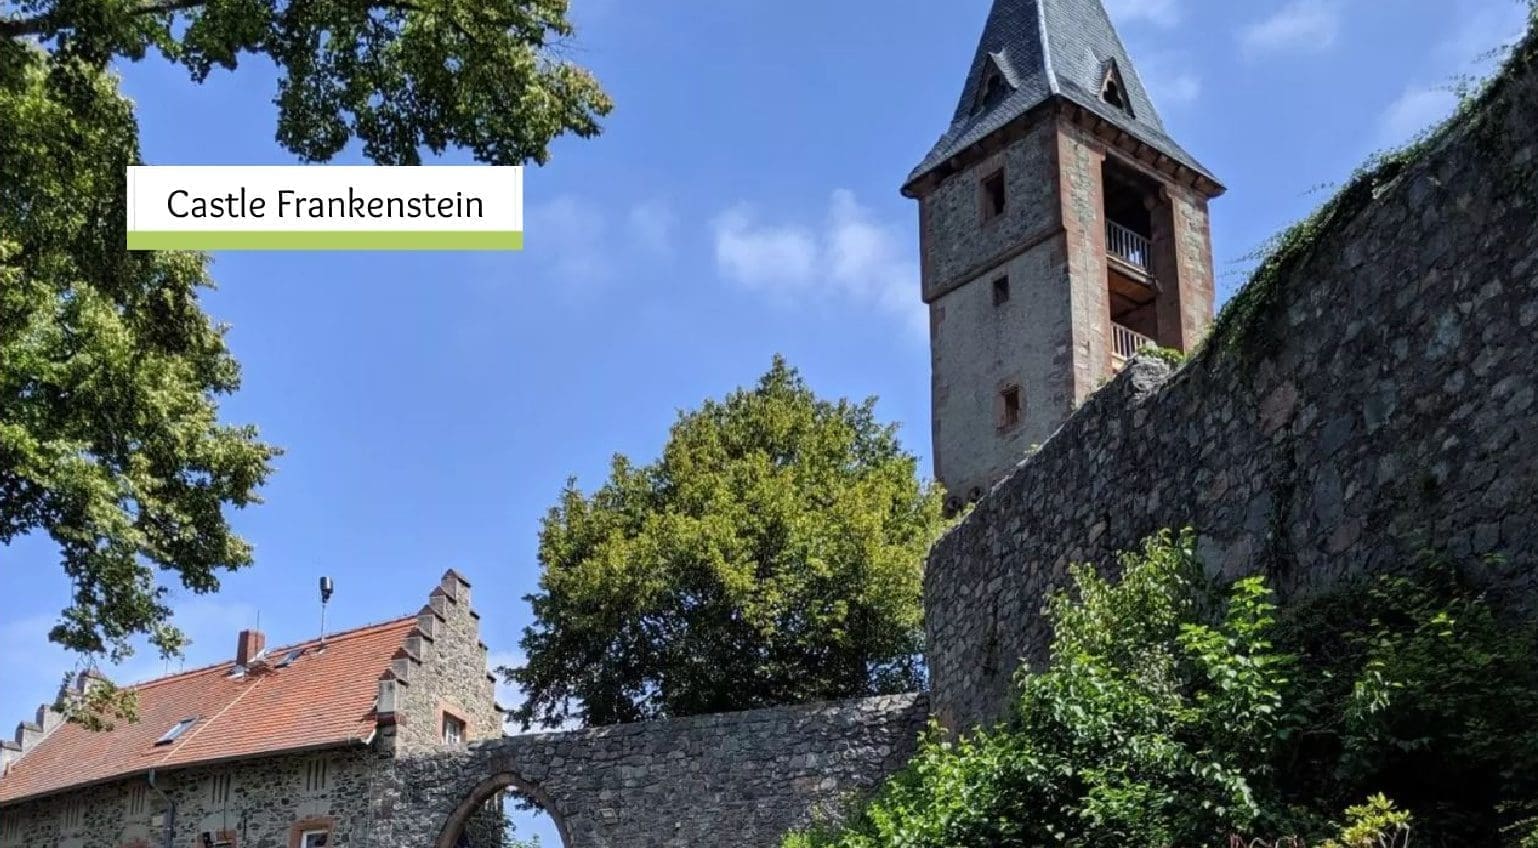 Castle Frankenstein in Germany- A Castle Swirled in Mystery and Legend